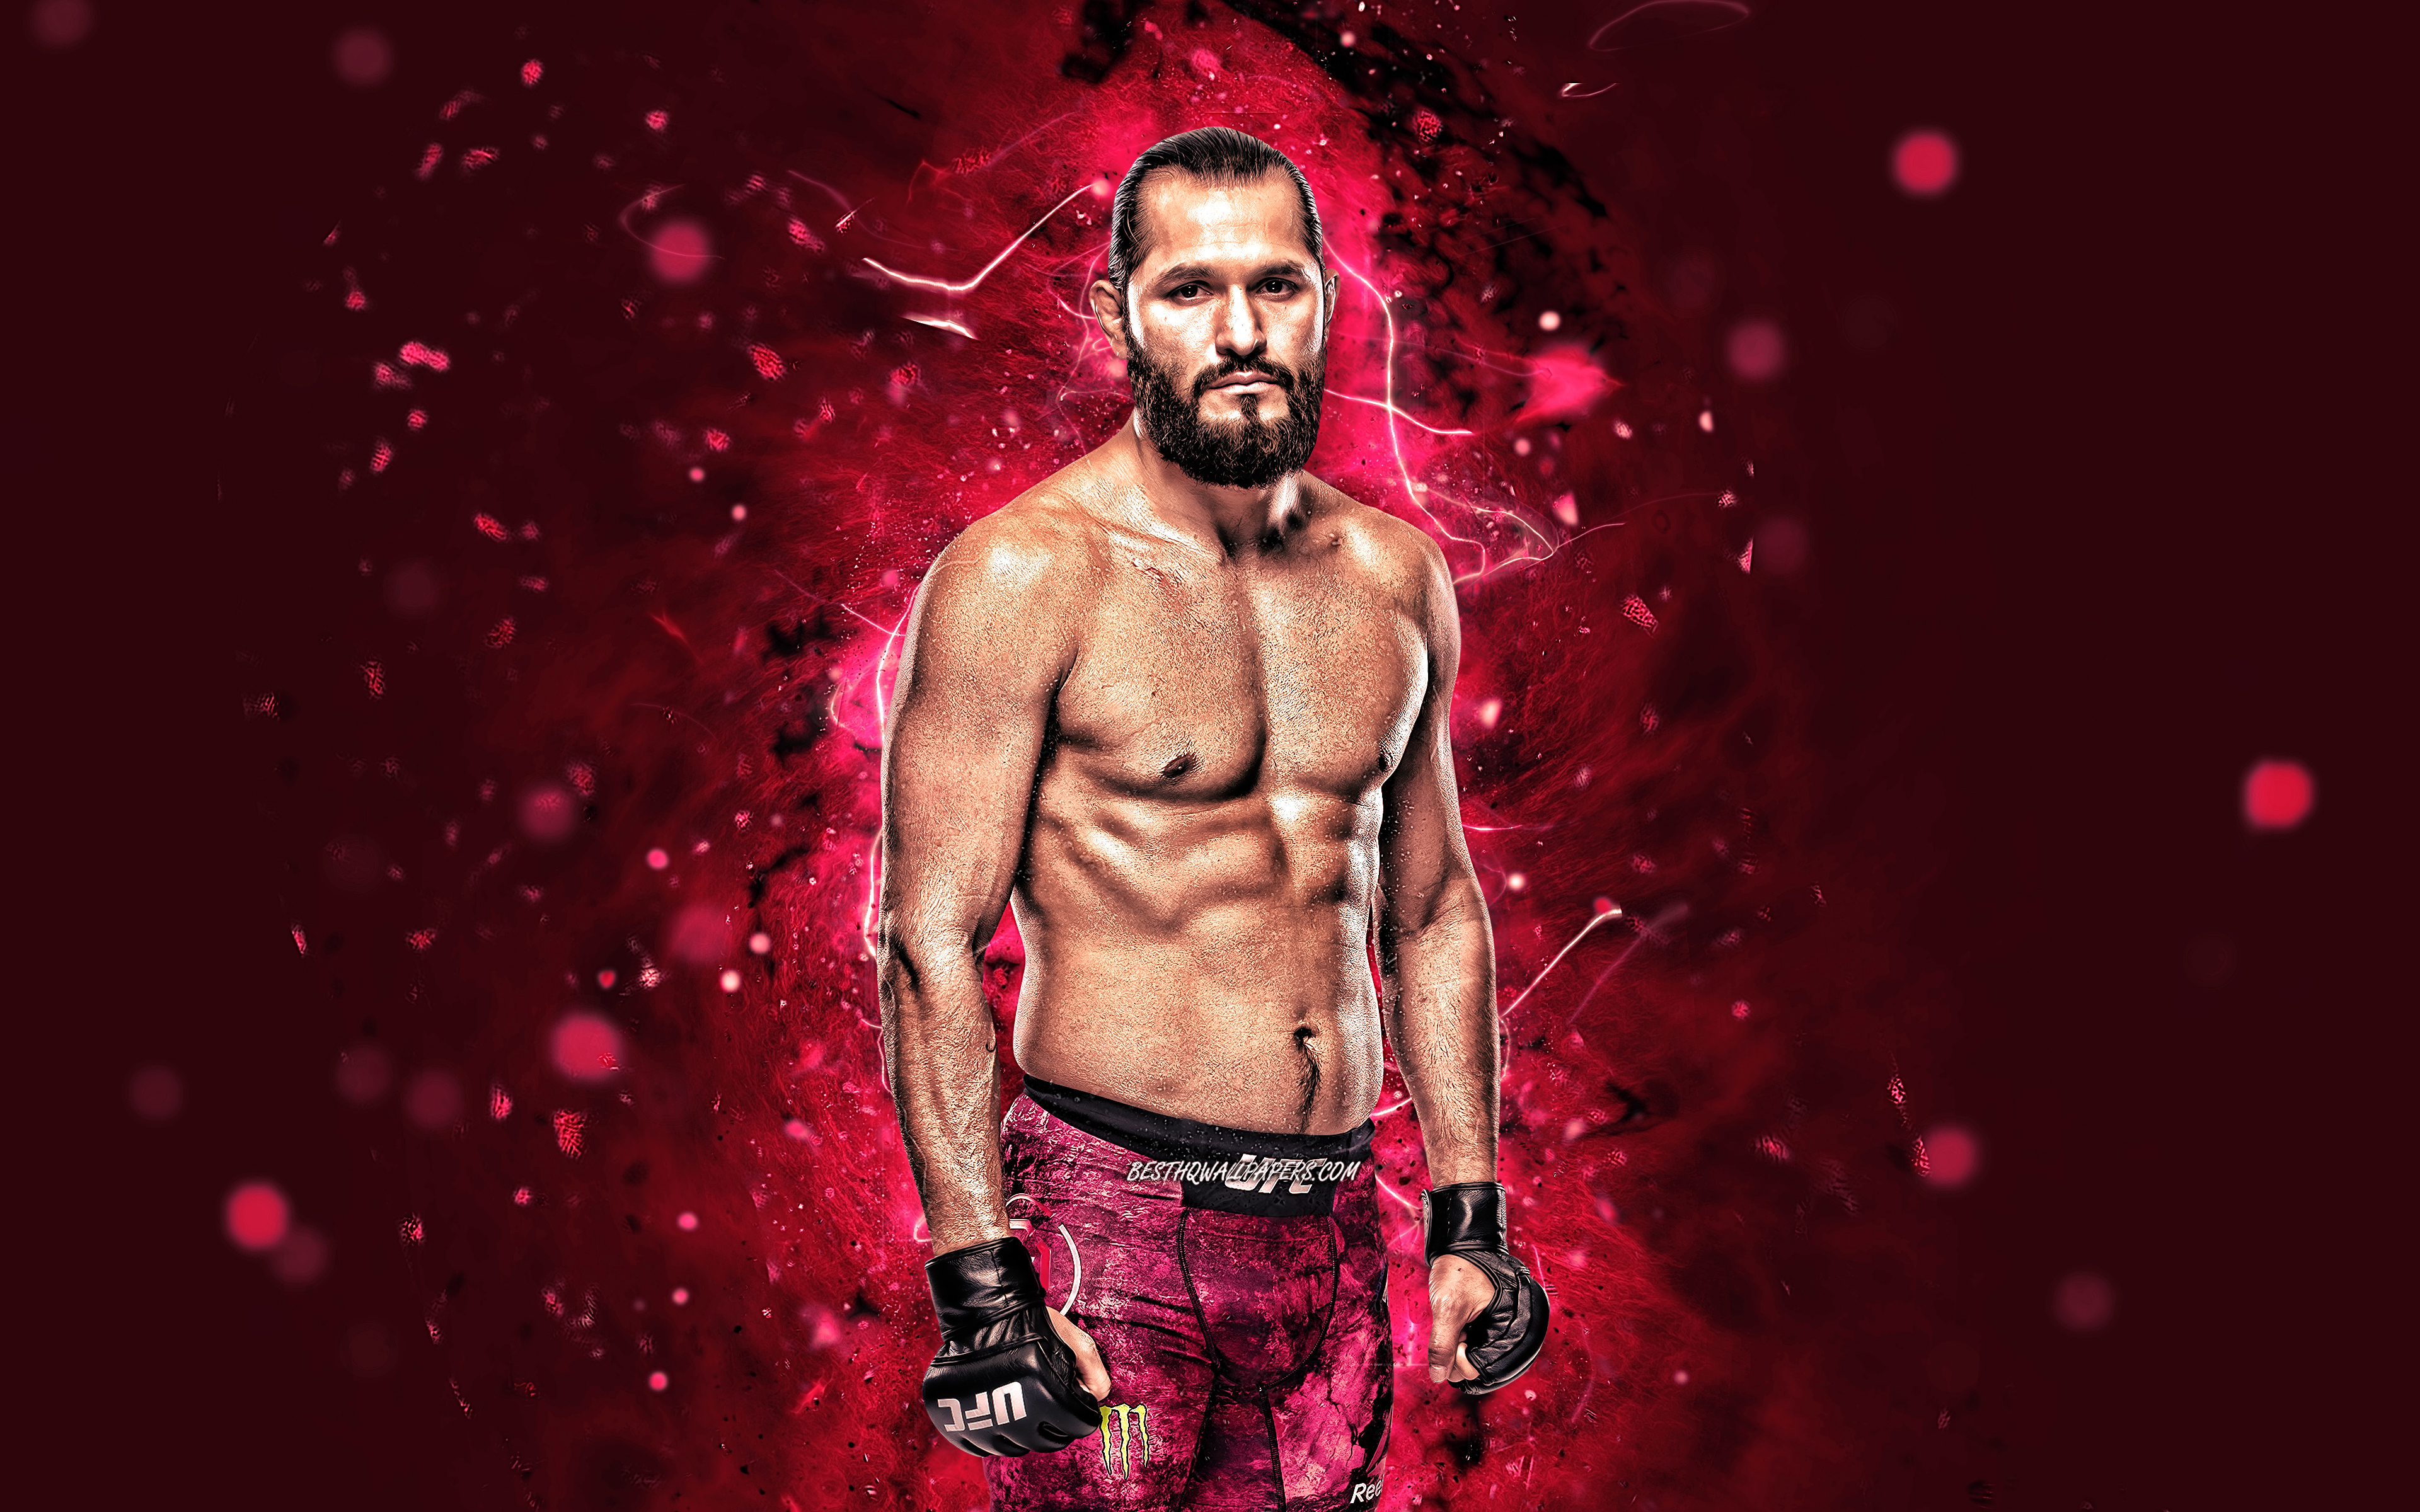 Download wallpaper Jorge Masvidal, 4k, purple neon lights, American fighters, MMA, UFC, Mixed martial arts, Jorge Masvidal 4K, UFC fighters, MMA fighters for desktop with resolution 3840x2400. High Quality HD picture wallpaper